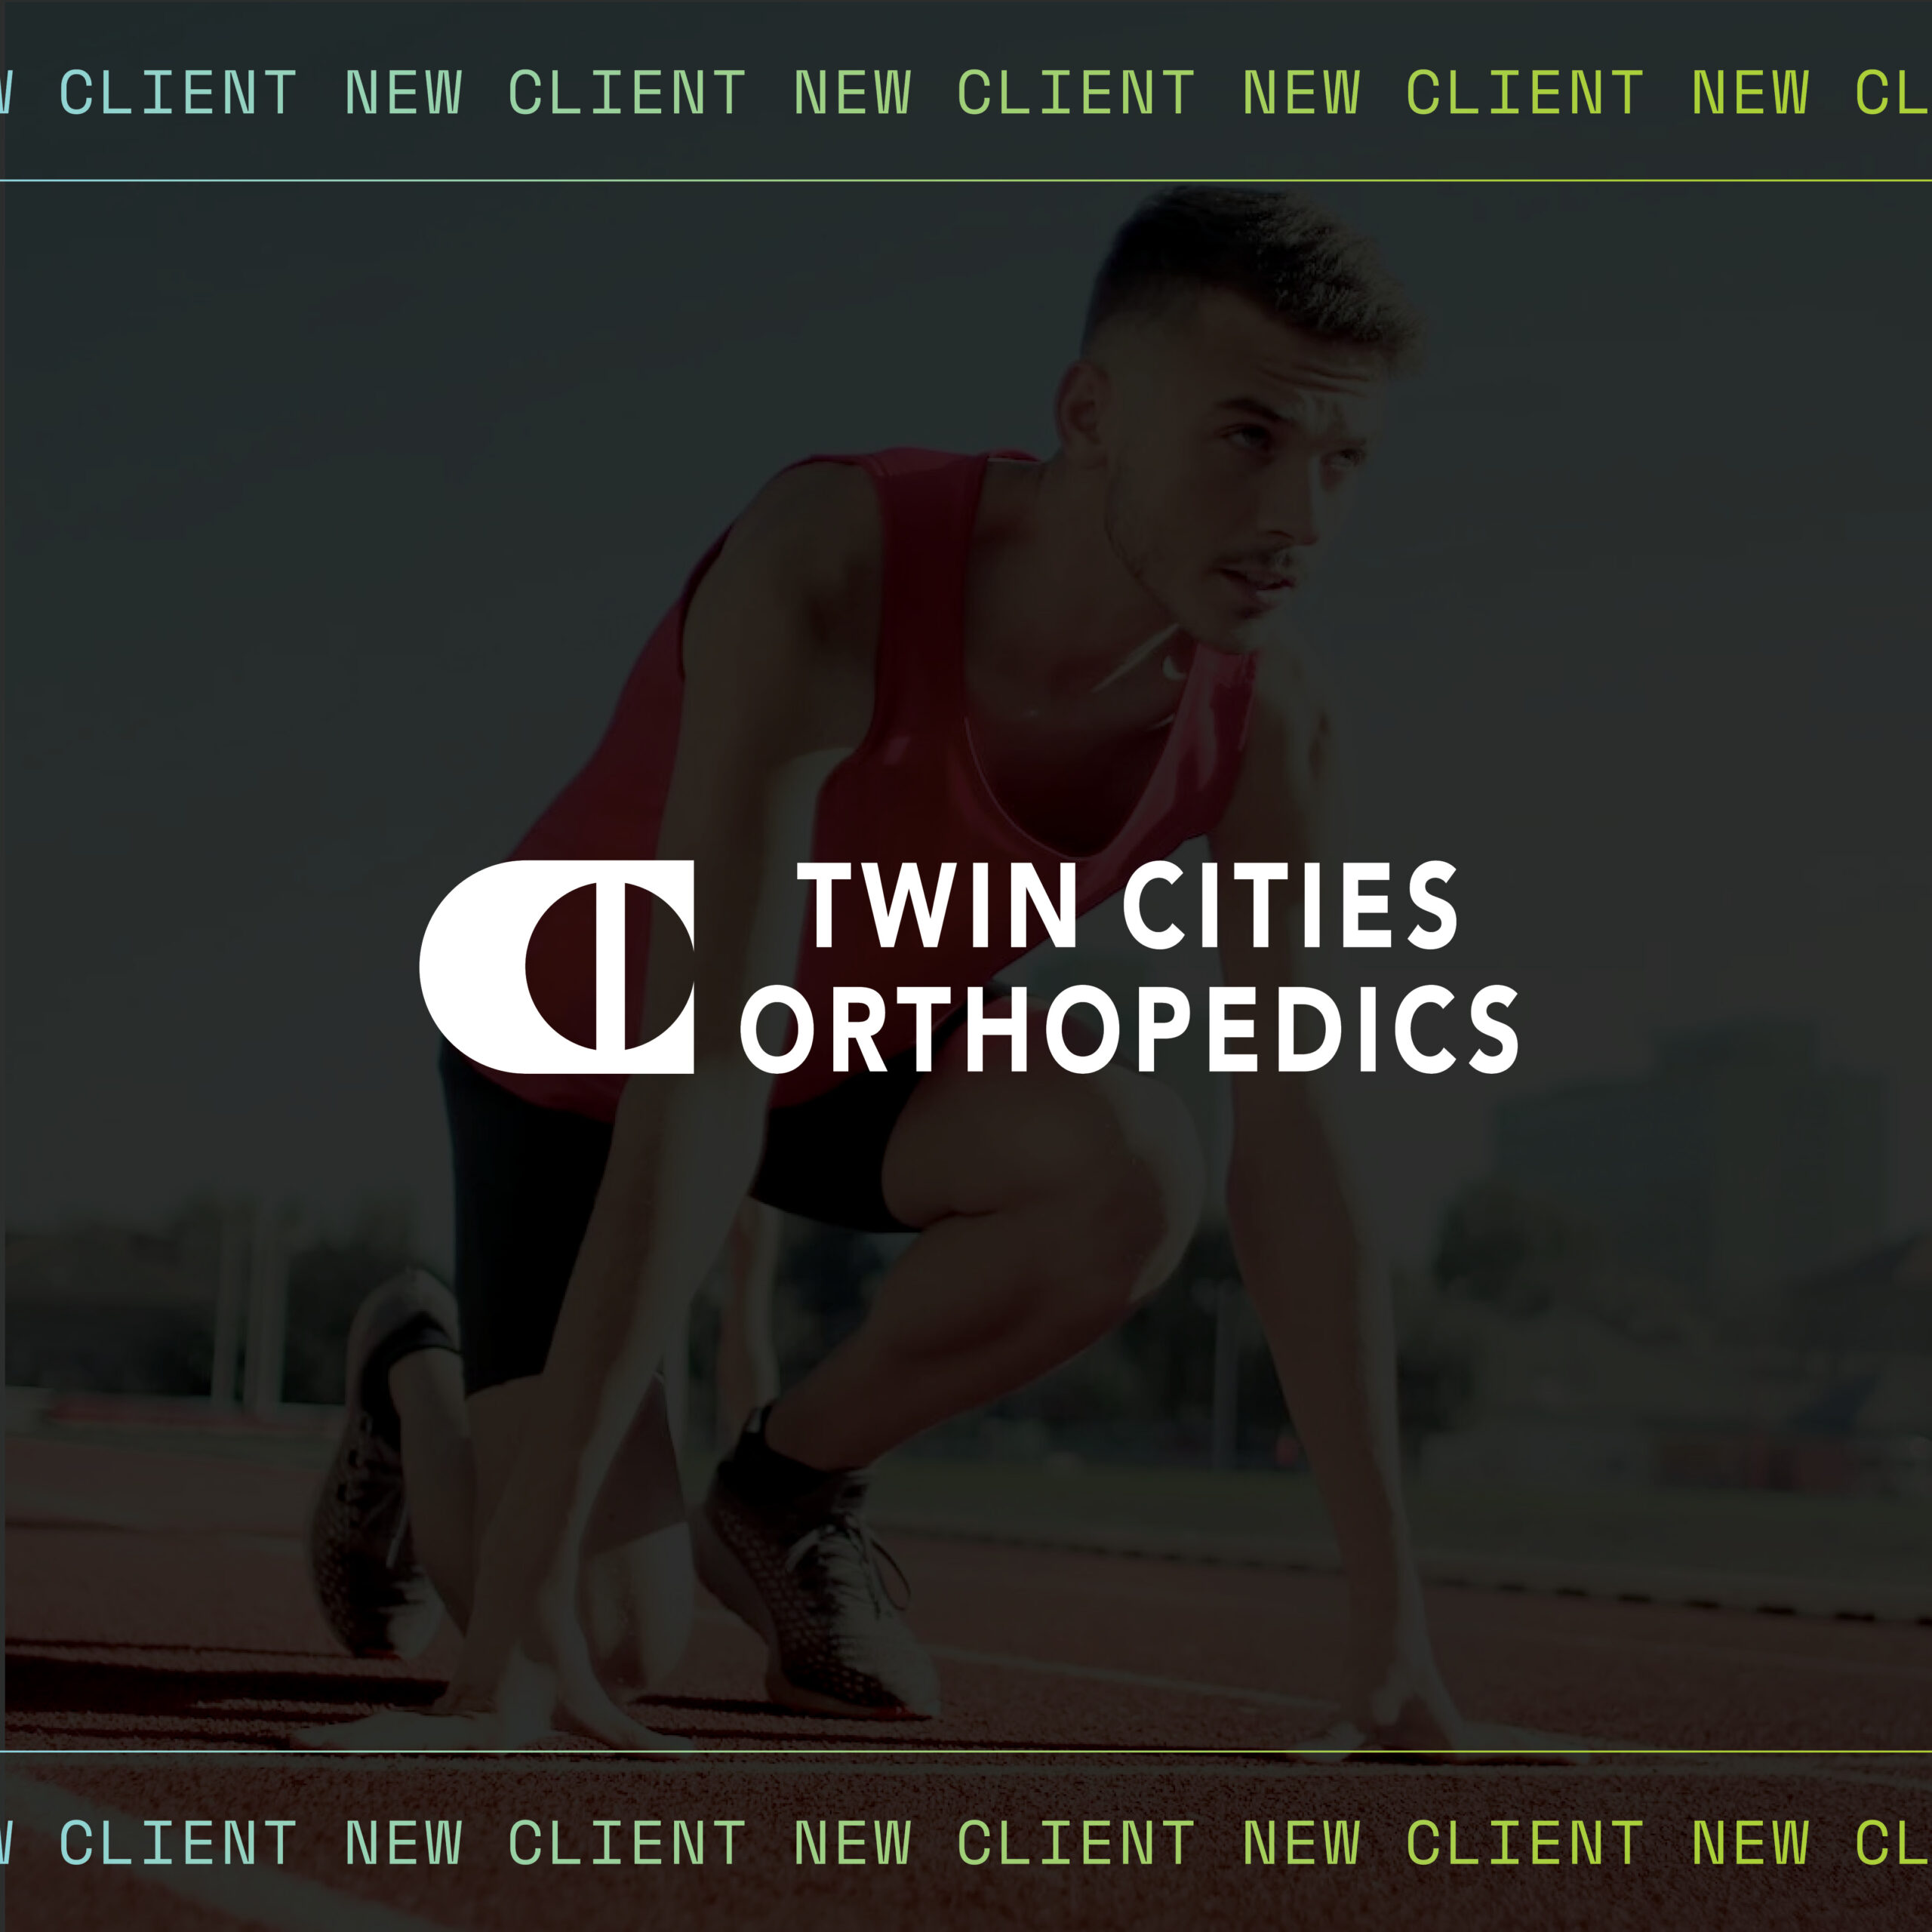 Twin Cities Orthopedics Chooses KC Truth As Agency Partner For Brand Strategy, Creative And Digital Media - KC Truth